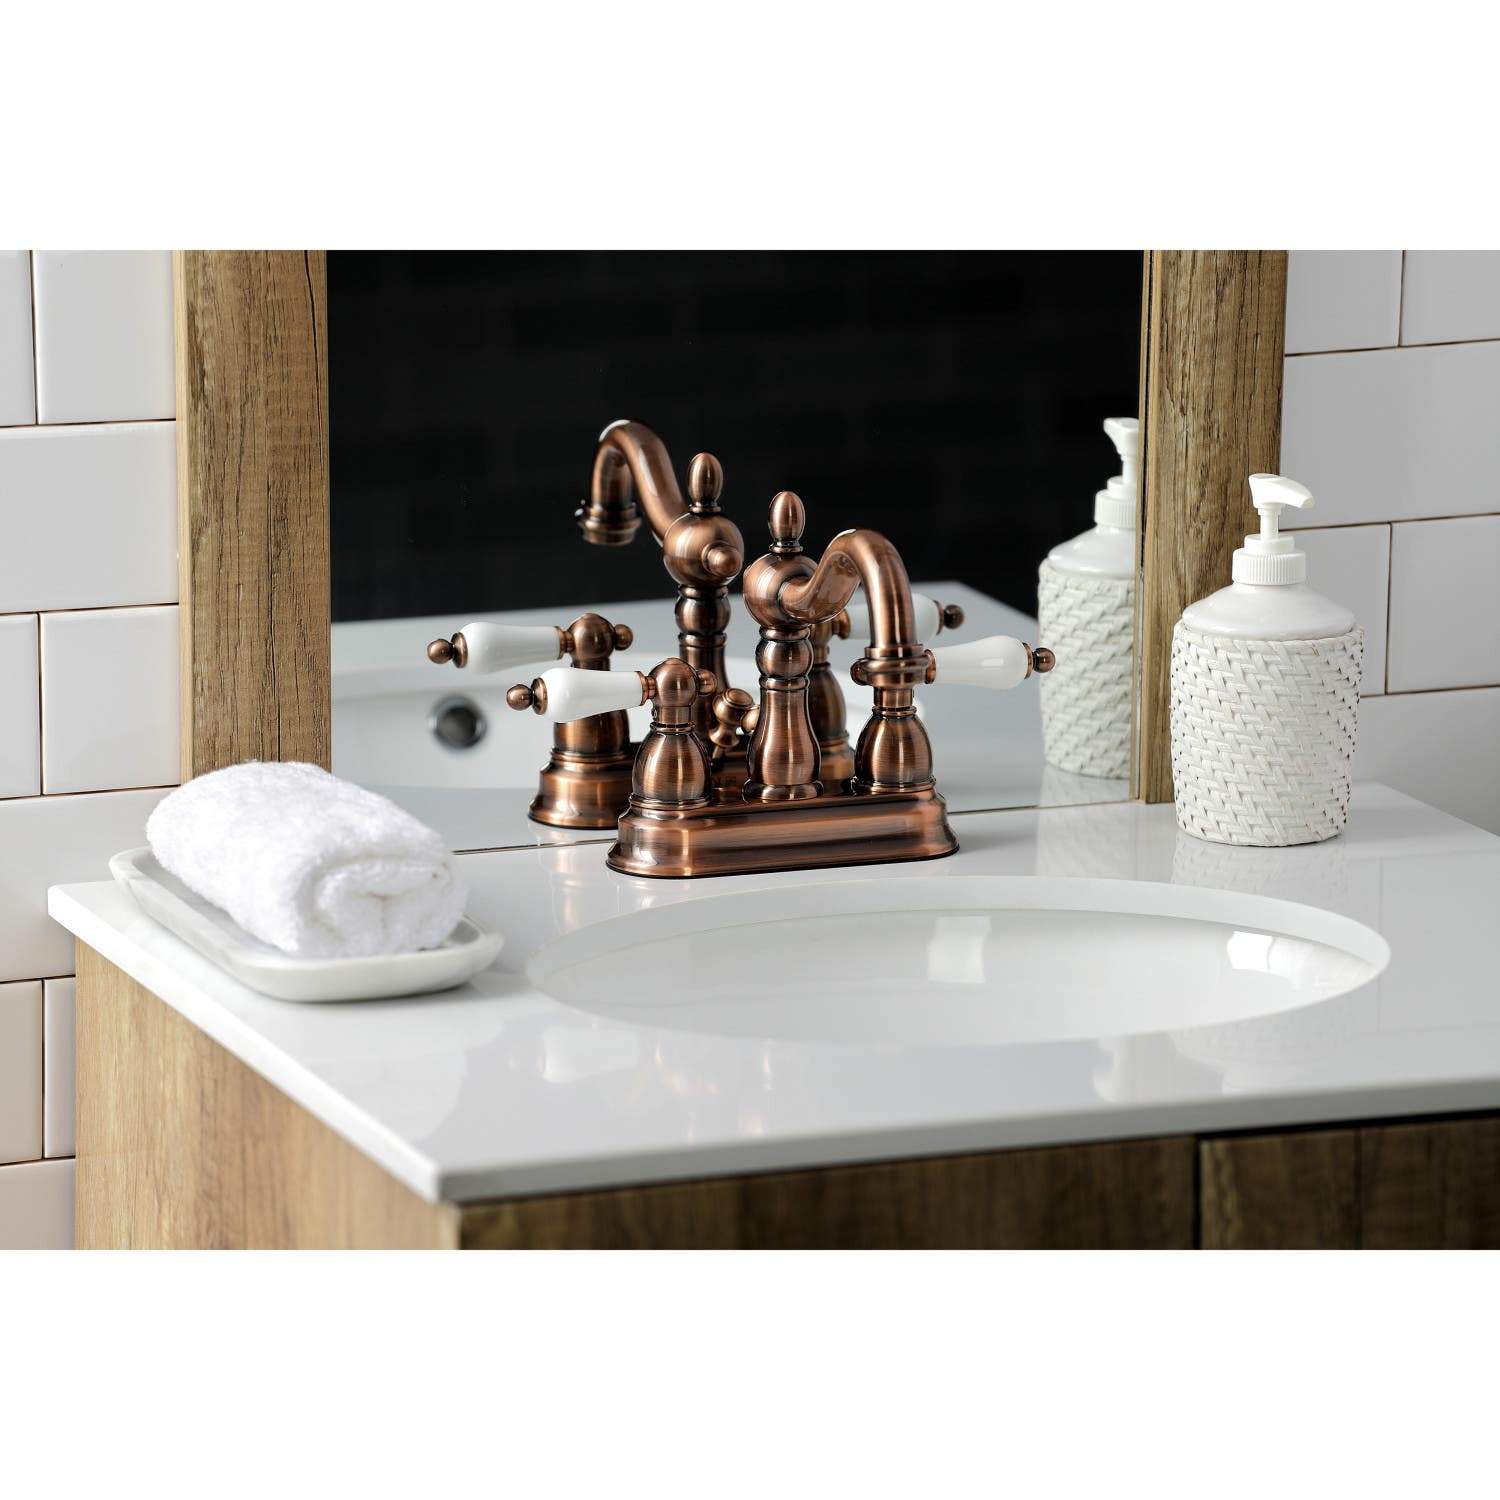 Kingston Brass KB160PLAC Heritage 4 in. Centerset Bathroom Faucet, Antique Copper